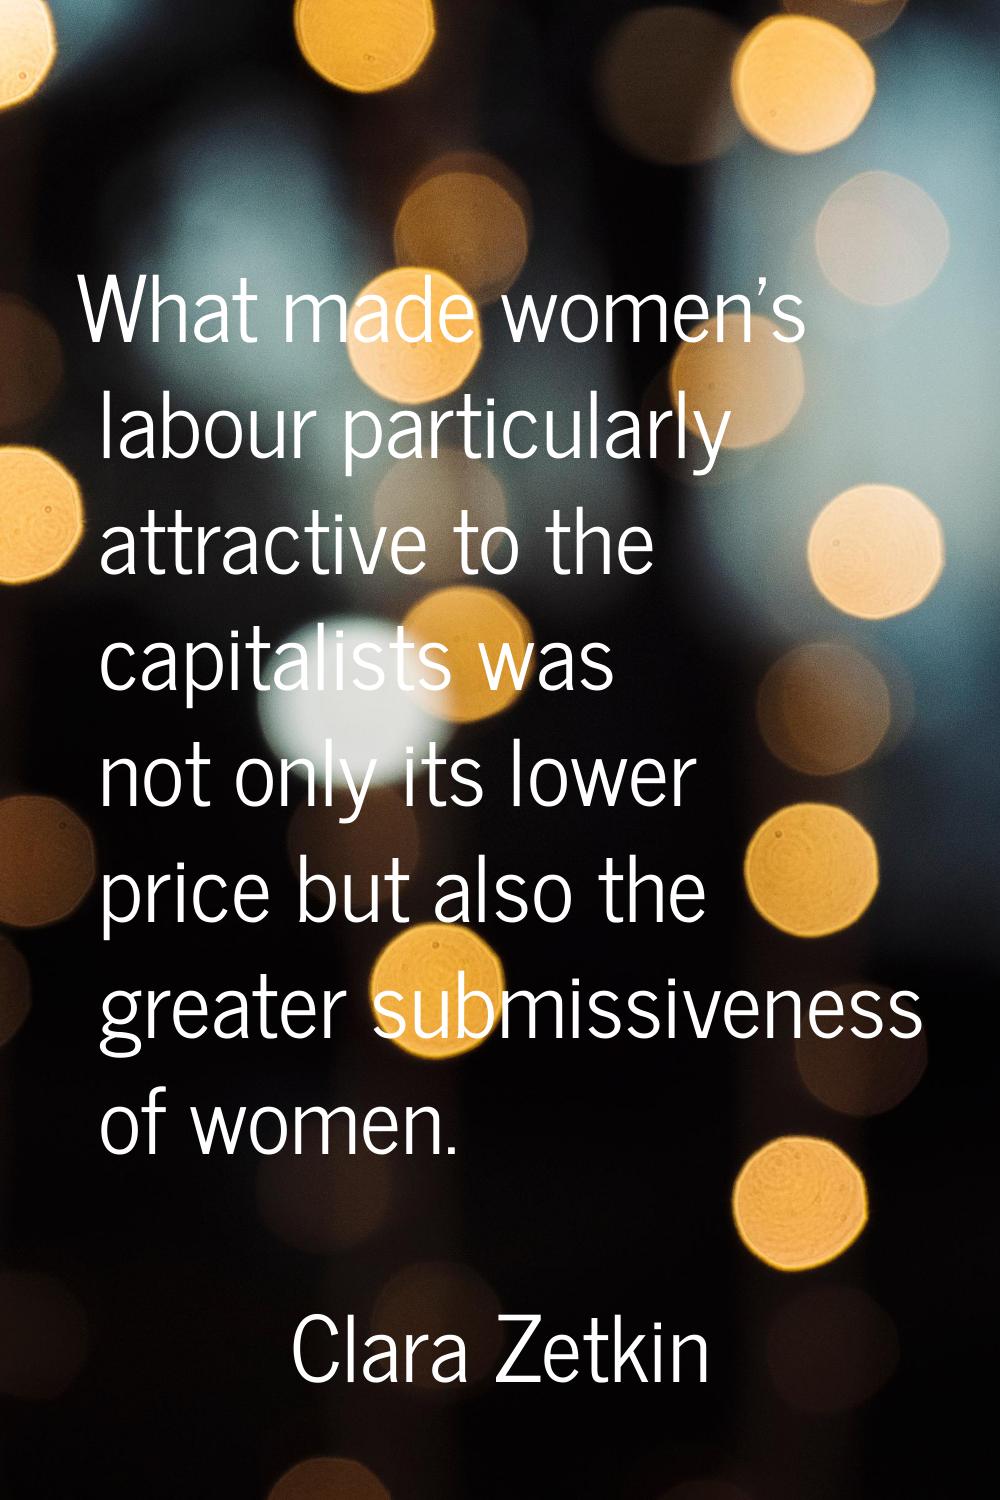 What made women's labour particularly attractive to the capitalists was not only its lower price bu